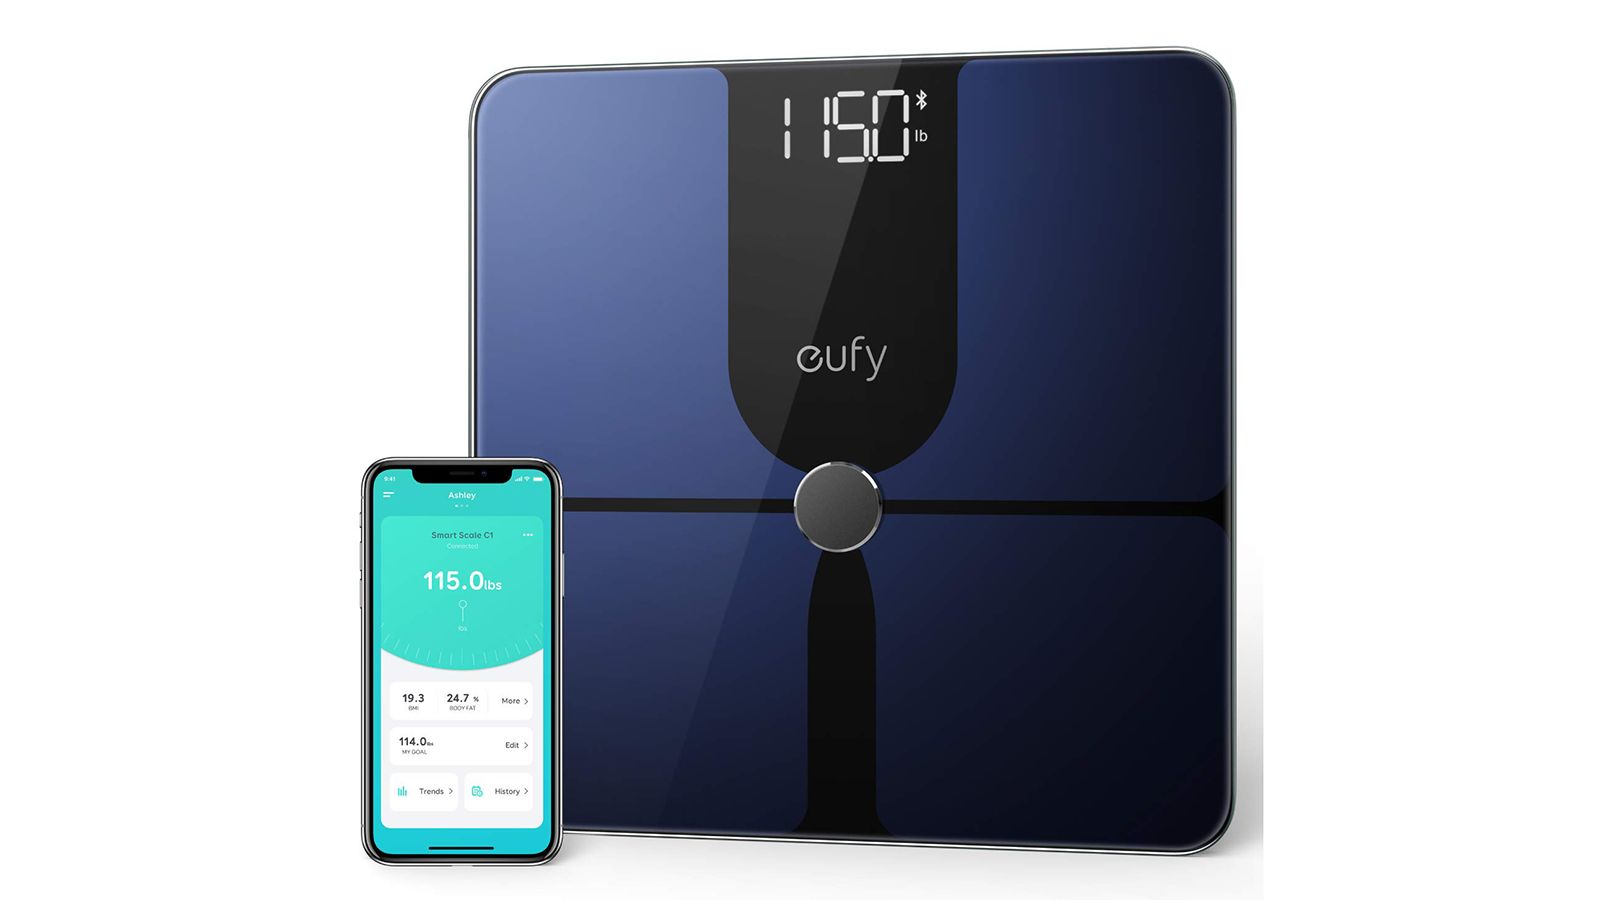 Wyze Scale (Original) Wins Best Smart Scale & Most Accurate -per CNN tests  - Lifestyle - Wyze Forum